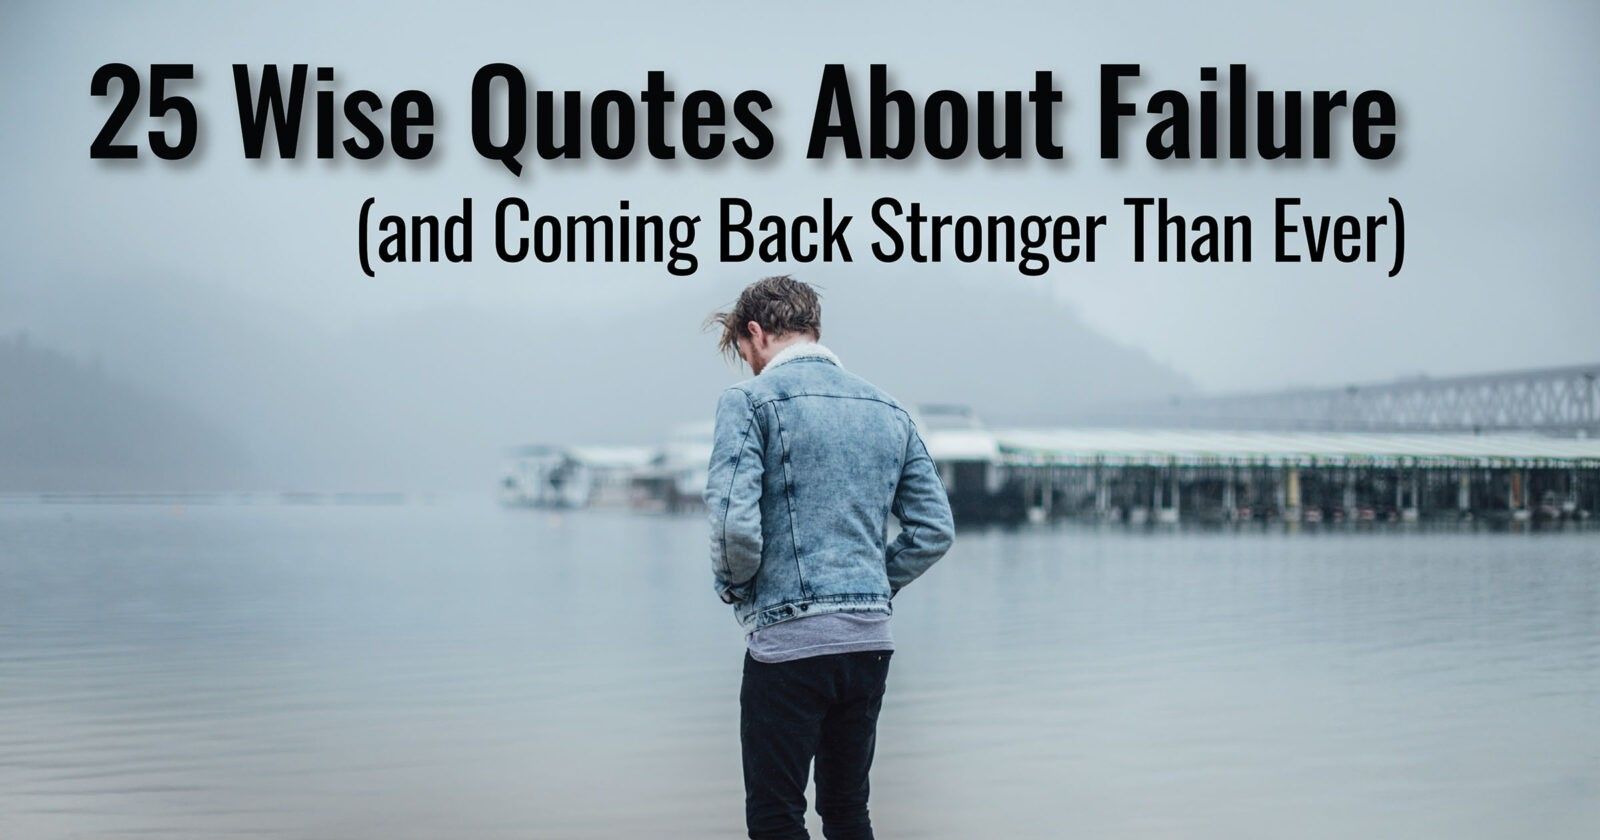 Quotes-about-failure